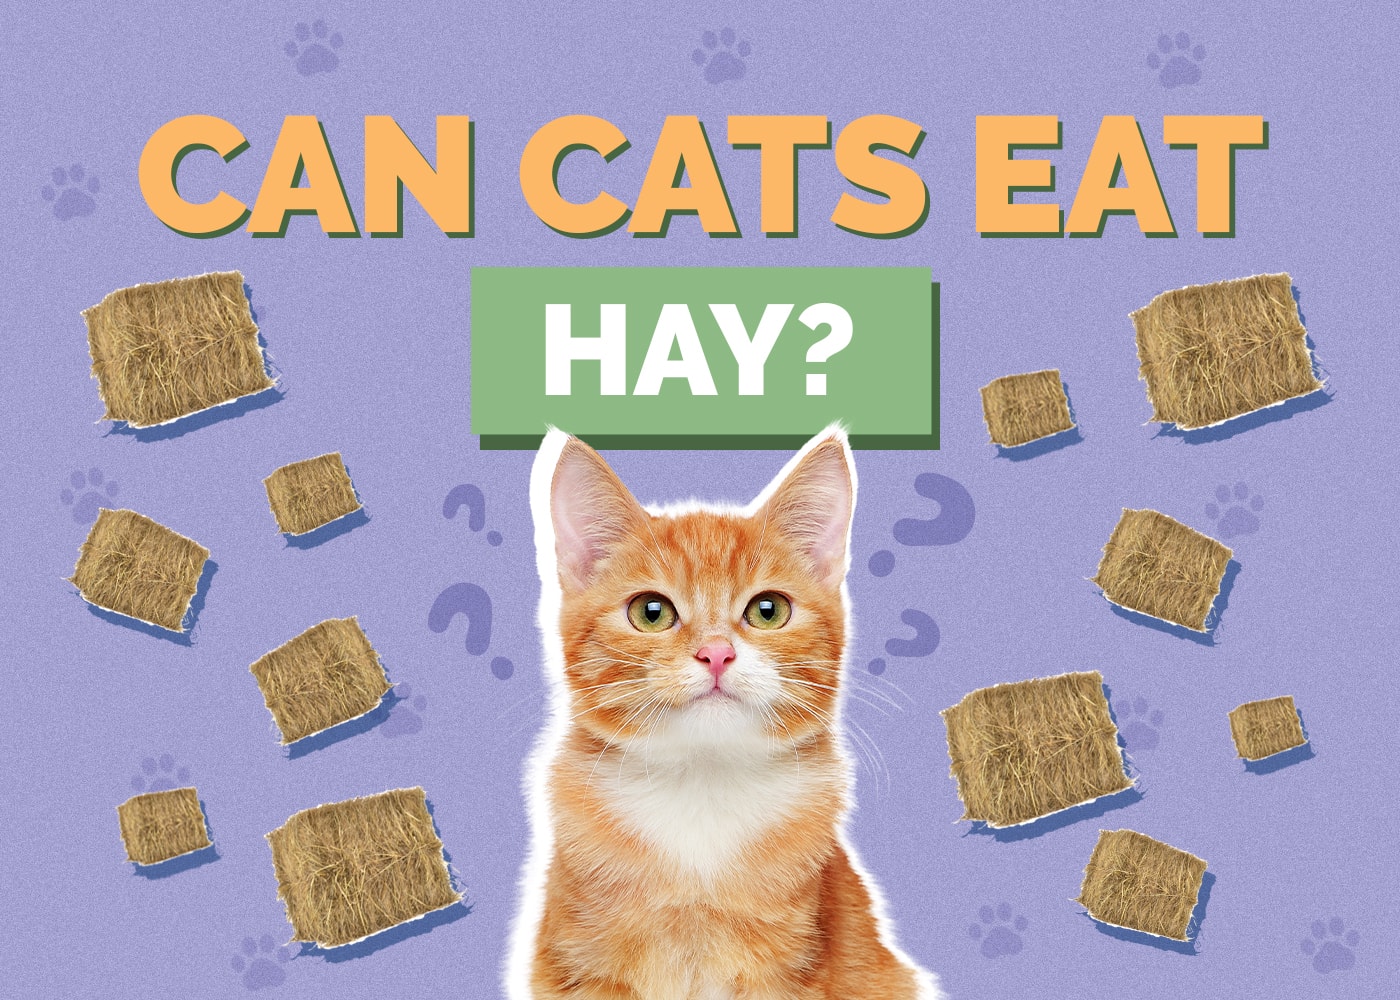 Can Cats Eat hay